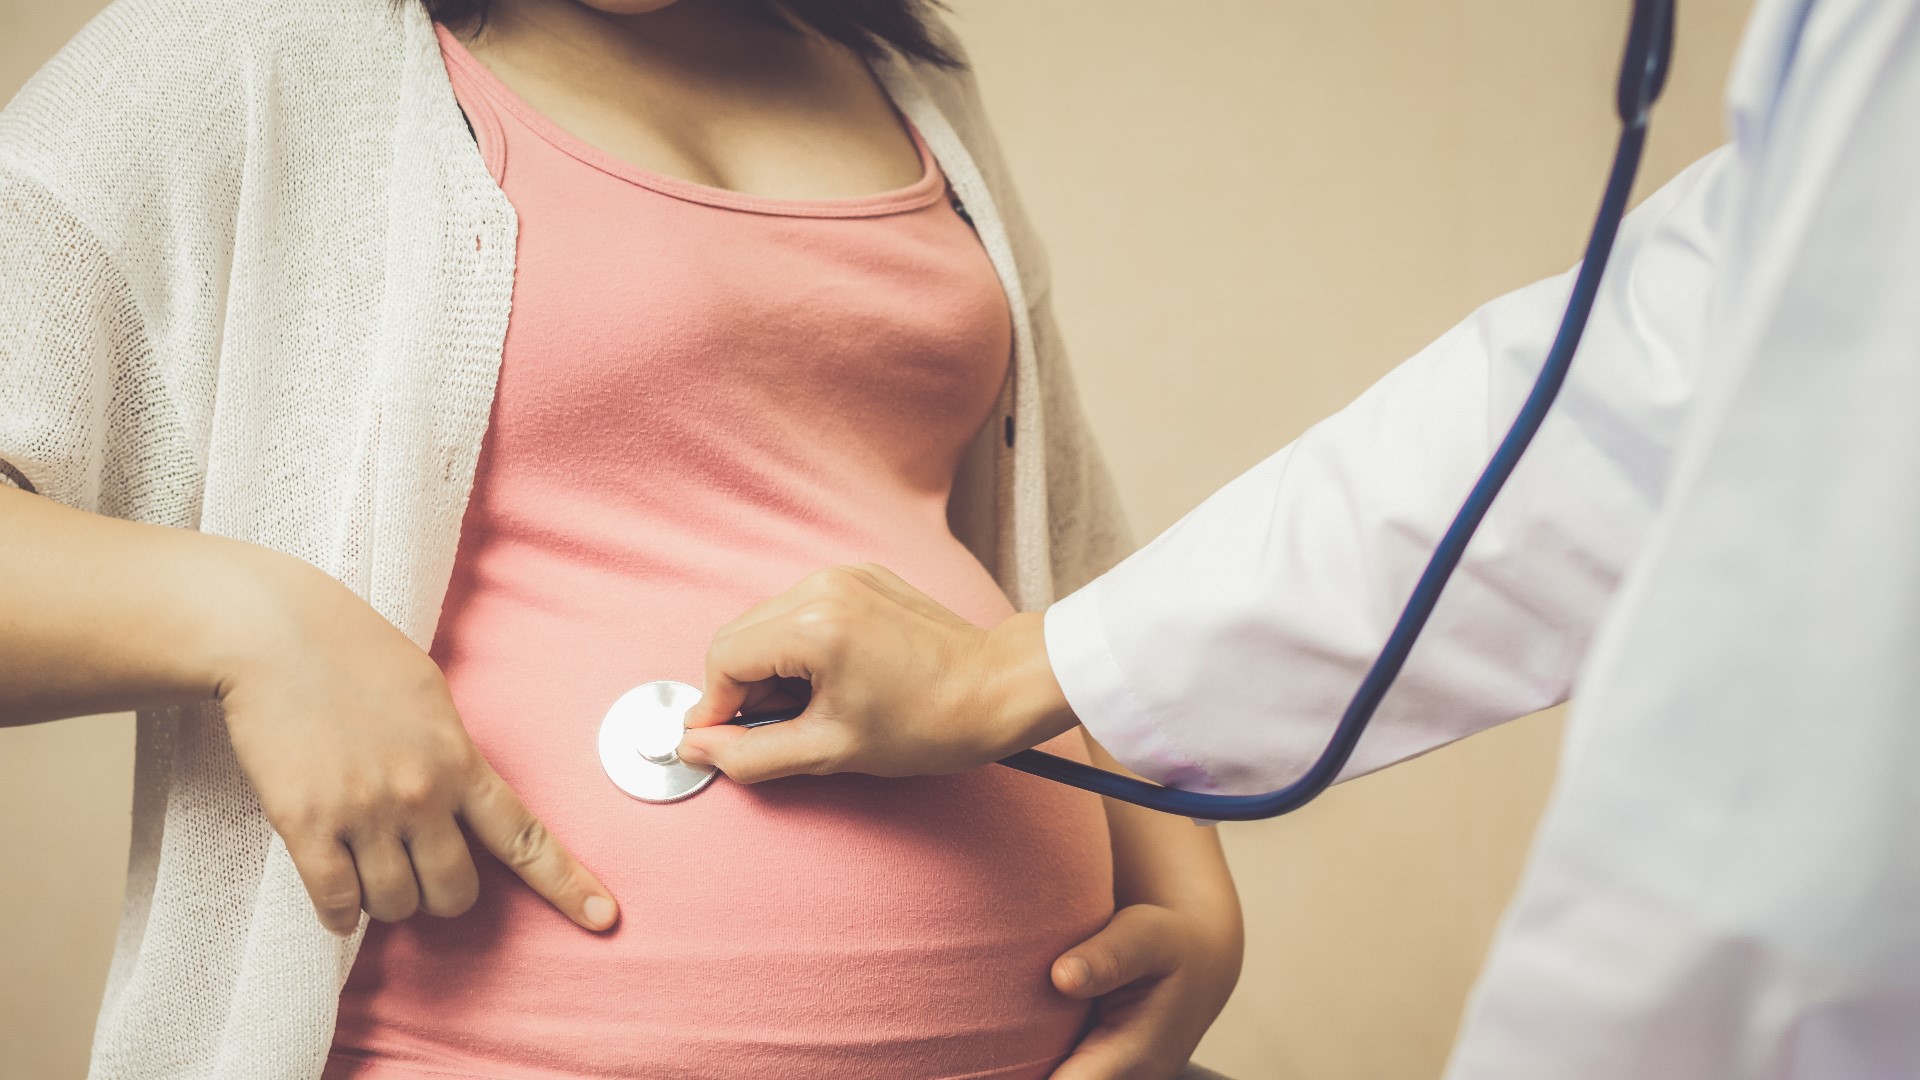 Pregnant women with COVID-19 are more likely to wind up in an ICU, placed on a ventilator or lose their lives. Should expecting mom's get the vaccine?